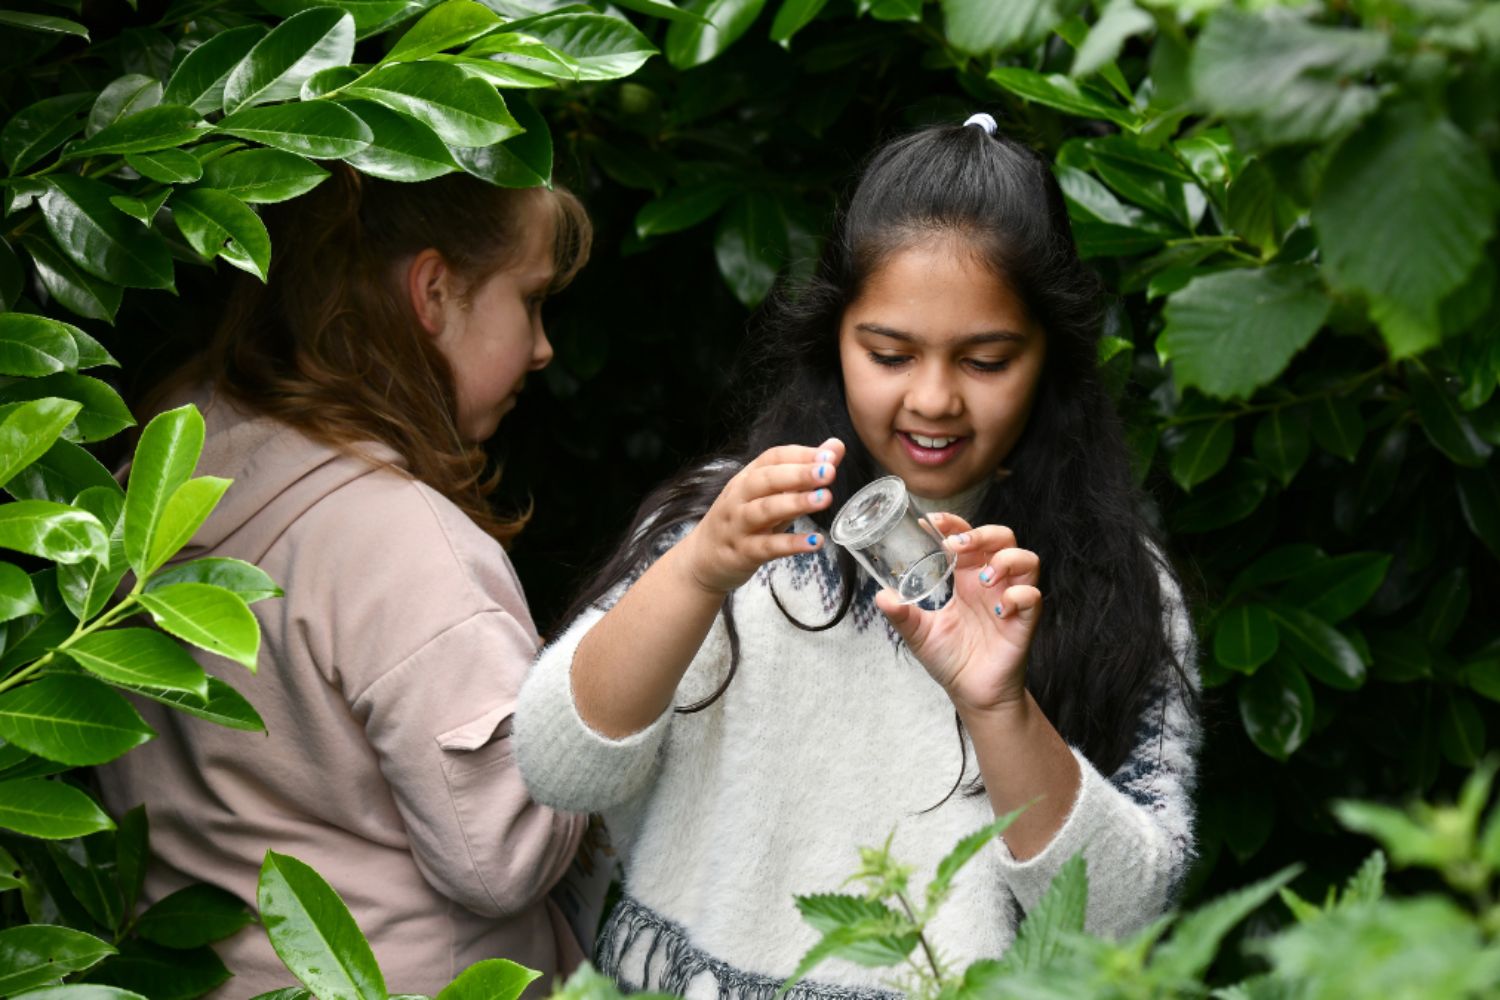 Two children examining an insect in a jar during an outdoor lesson on climate and sustainability.